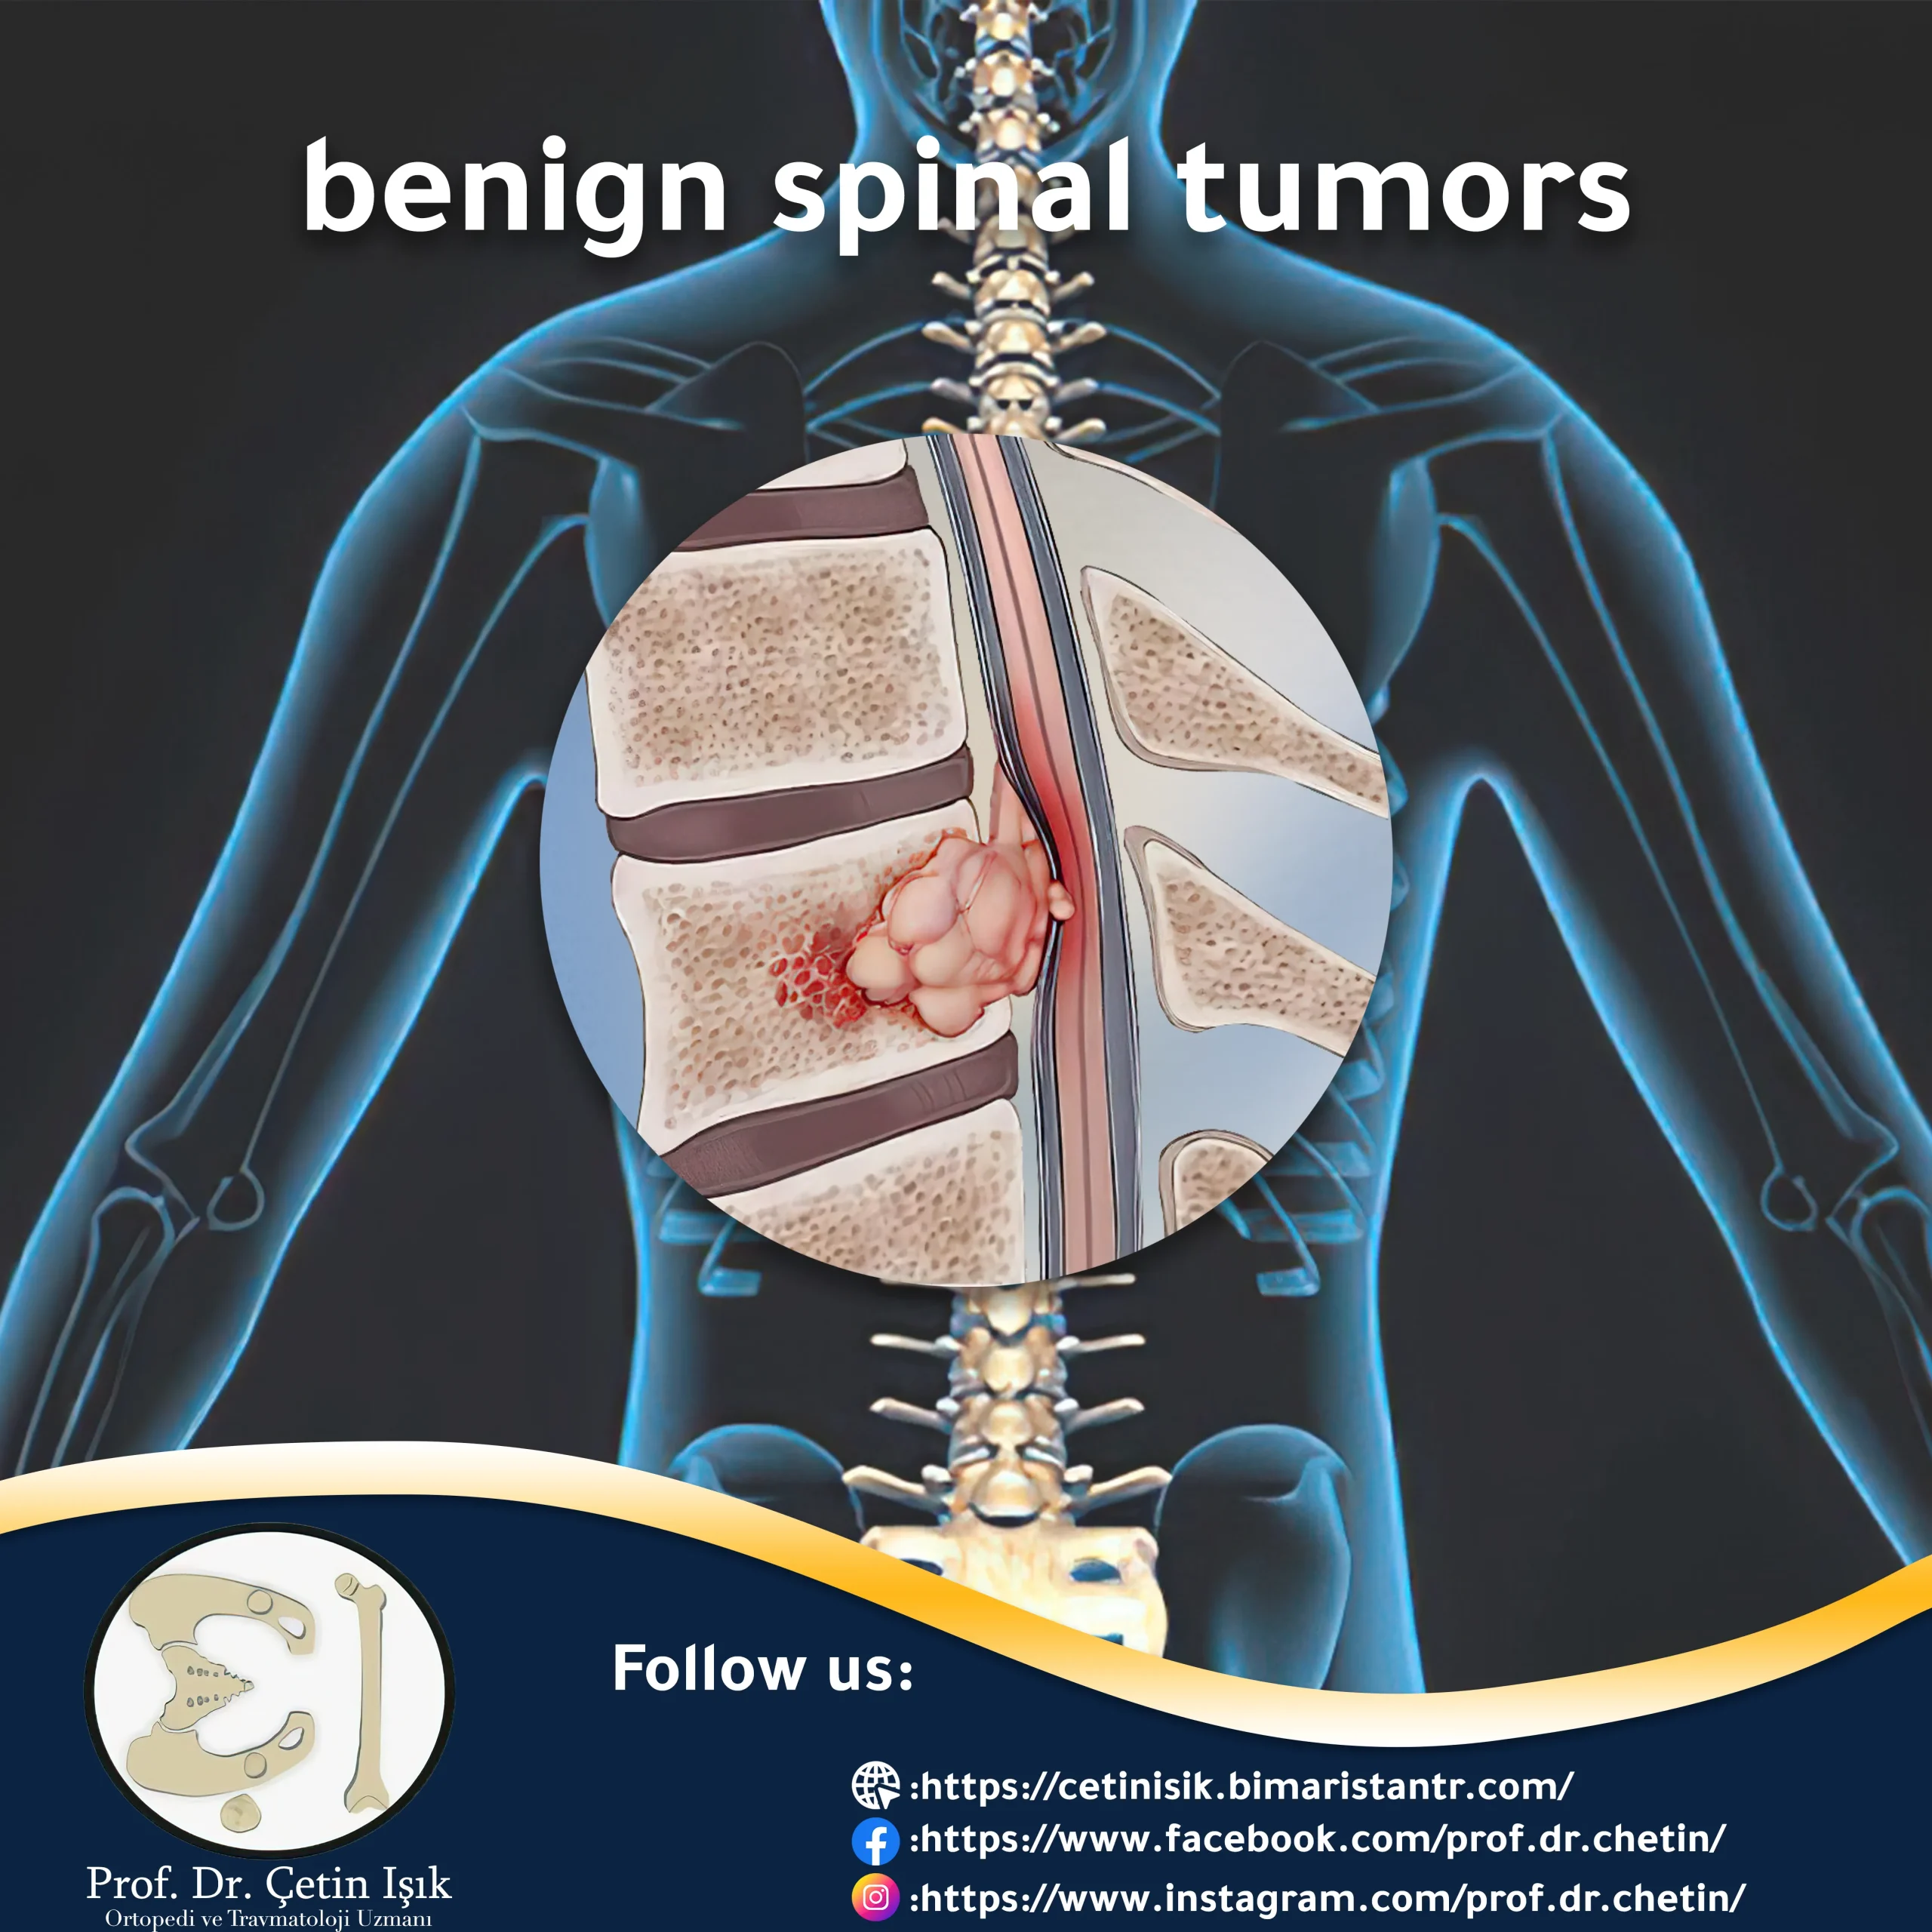 Benign spinal tumors and methods of treatment